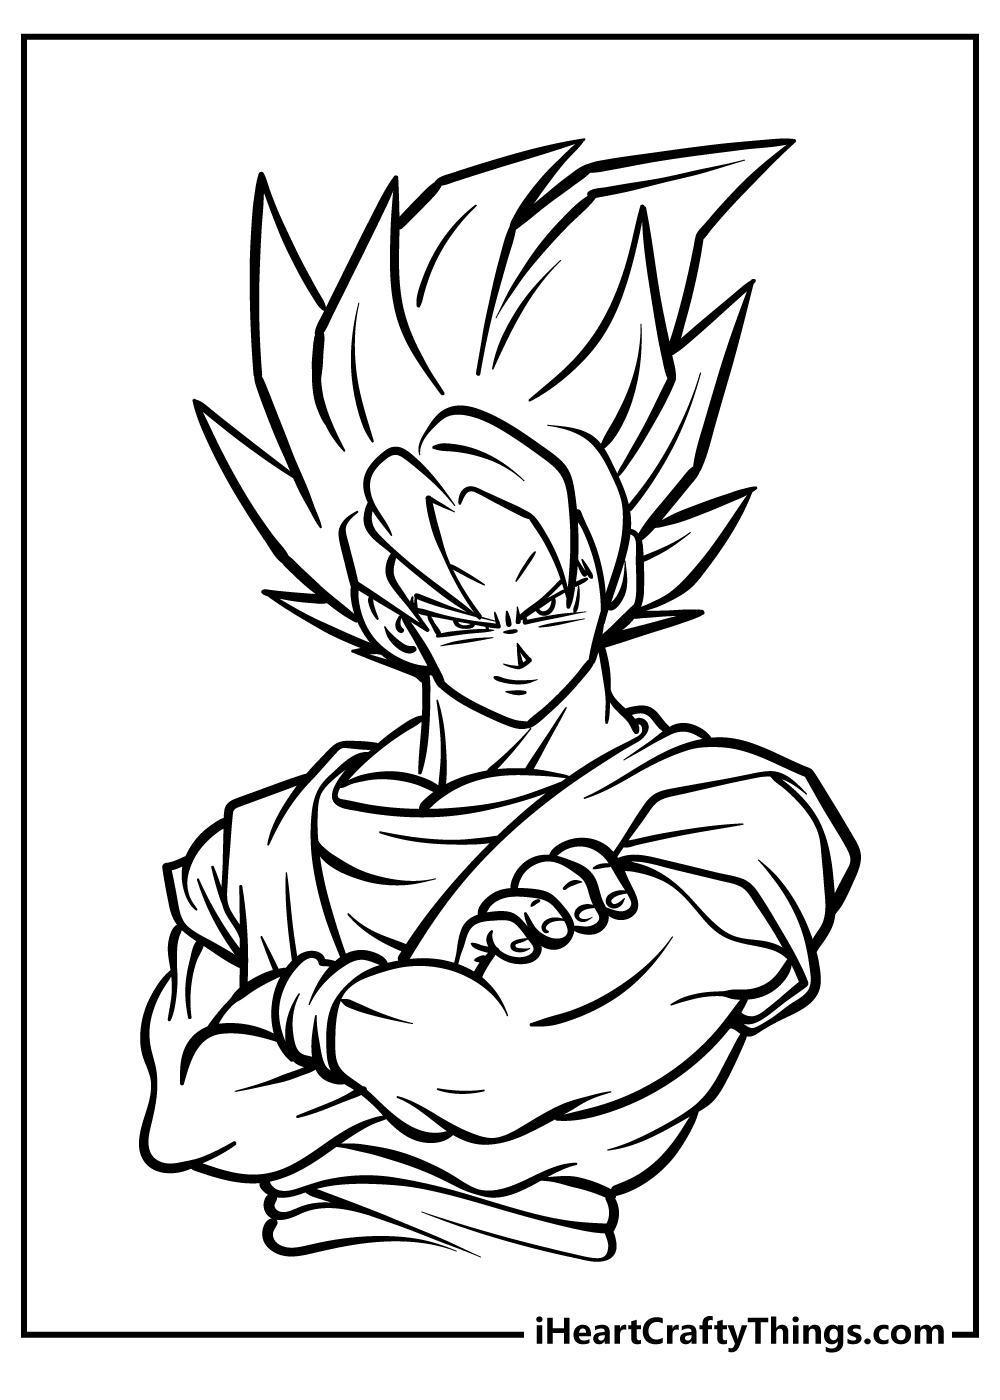 Dragon Ball Z Coloring Sheet for children free download